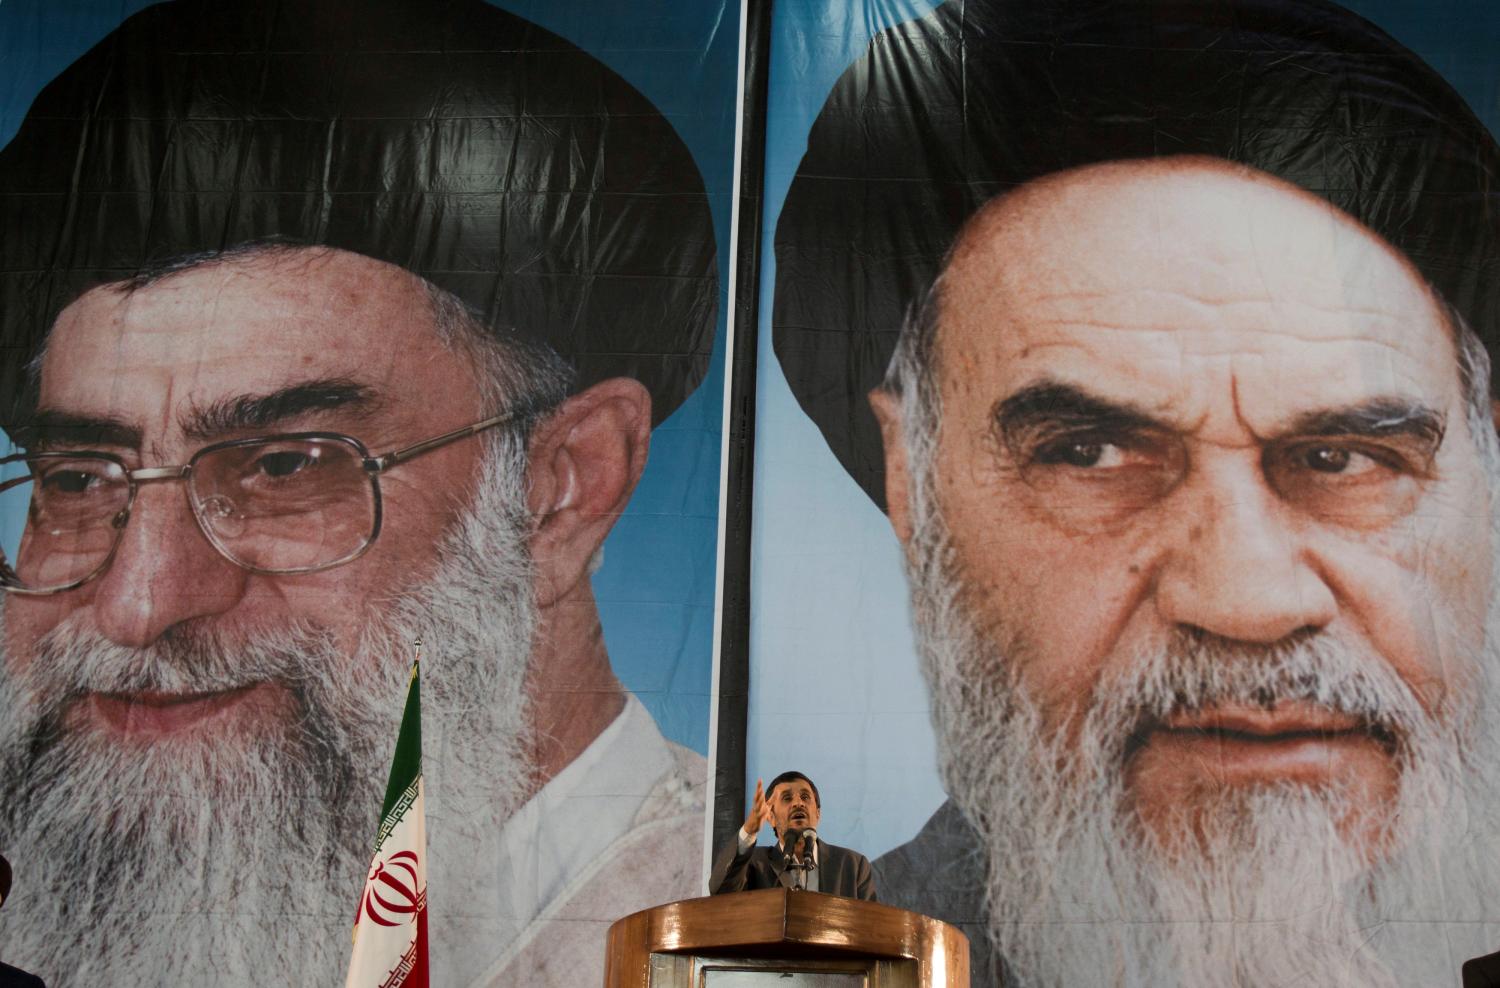 Iranian President Mahmoud Ahmadinejad stands under pictures of Iran's Supreme Leader Ayatollah Ali Khamenei (L) and Iran's late leader Ayatollah Ruhollah Khomeini while speaking during a ceremony to mark Khomeini's death anniversary at his tomb at Tehran's Behesht-Zahra cemetery June 3, 2011. REUTERS/Morteza Nikoubazl/File Photo